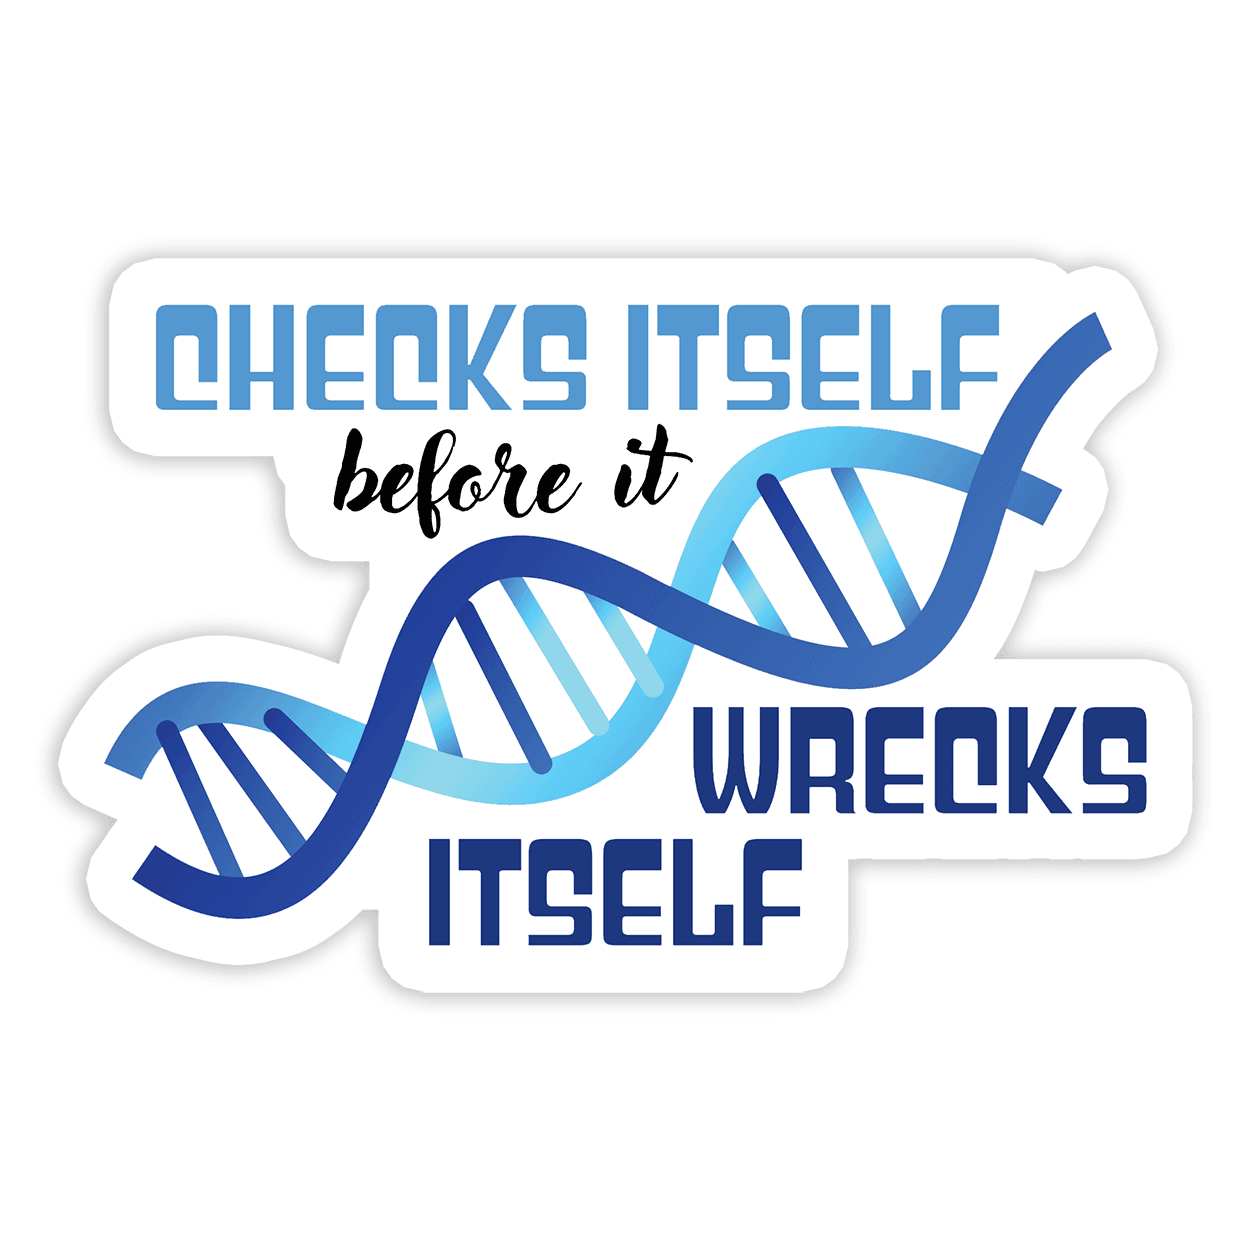 Image of a vinyl sticker that is 3 inch on its longest side with a biology theme